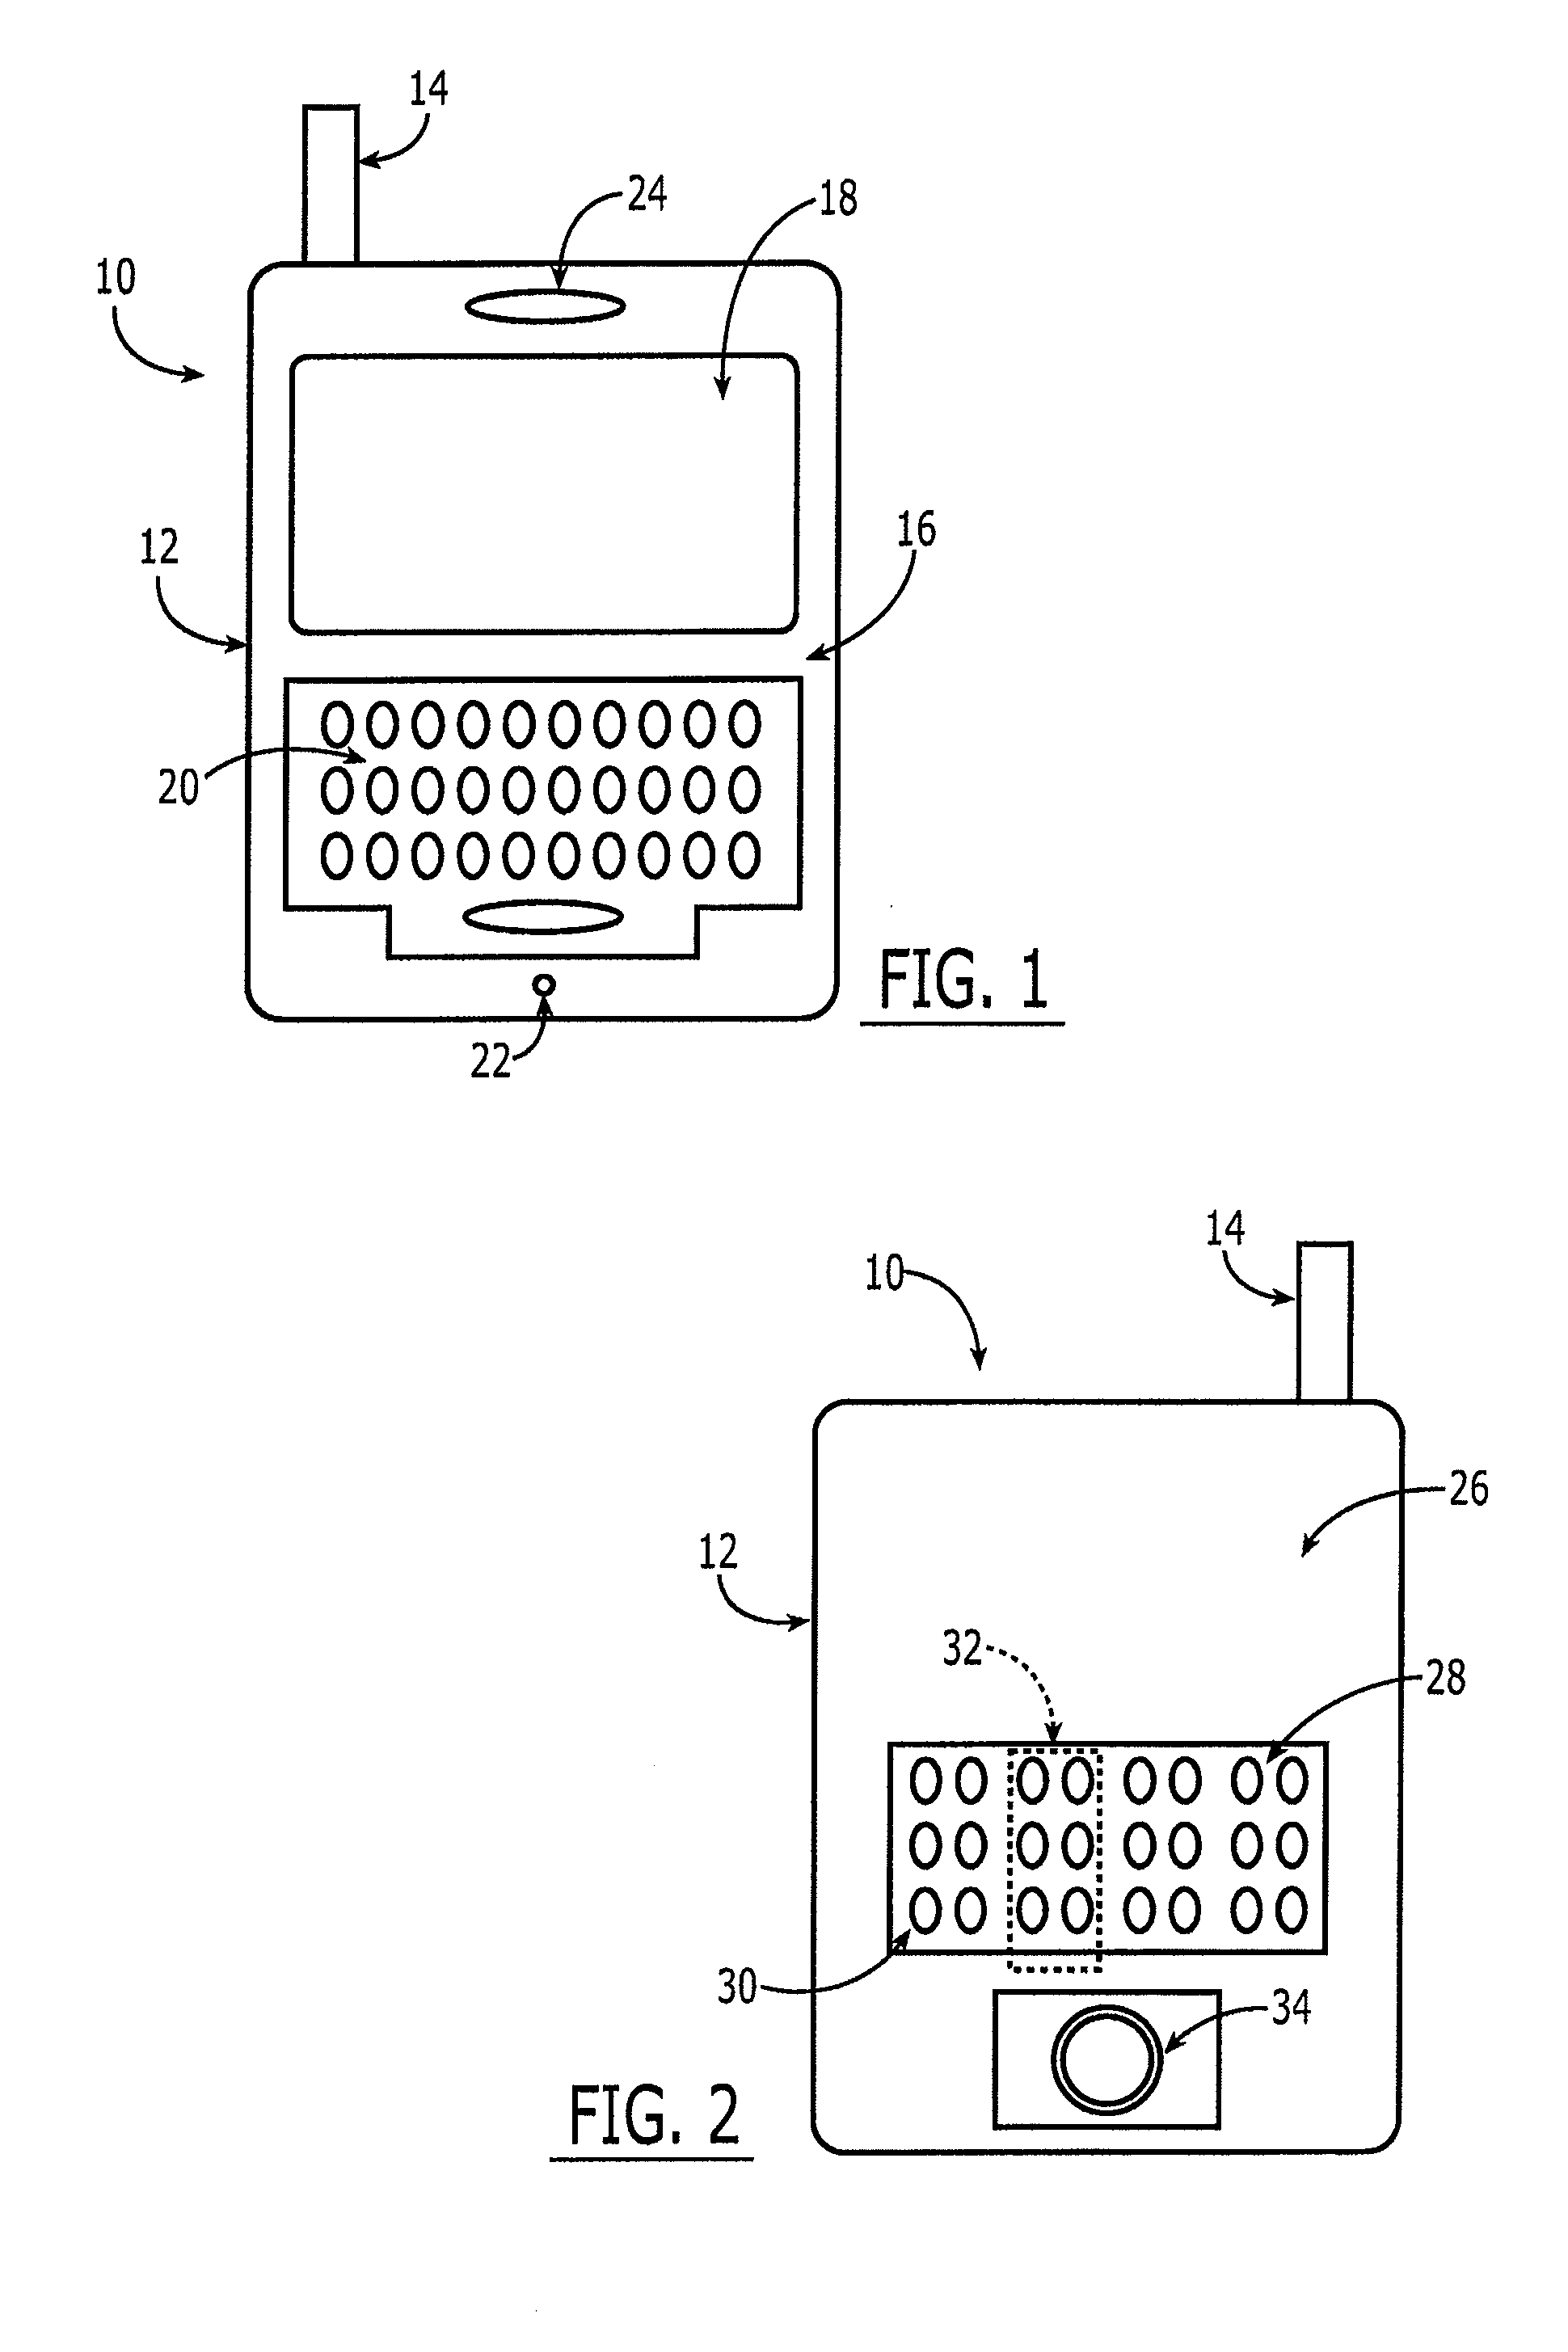 Apparatus and Method for Presenting and Controllably Scrolling Braille Text